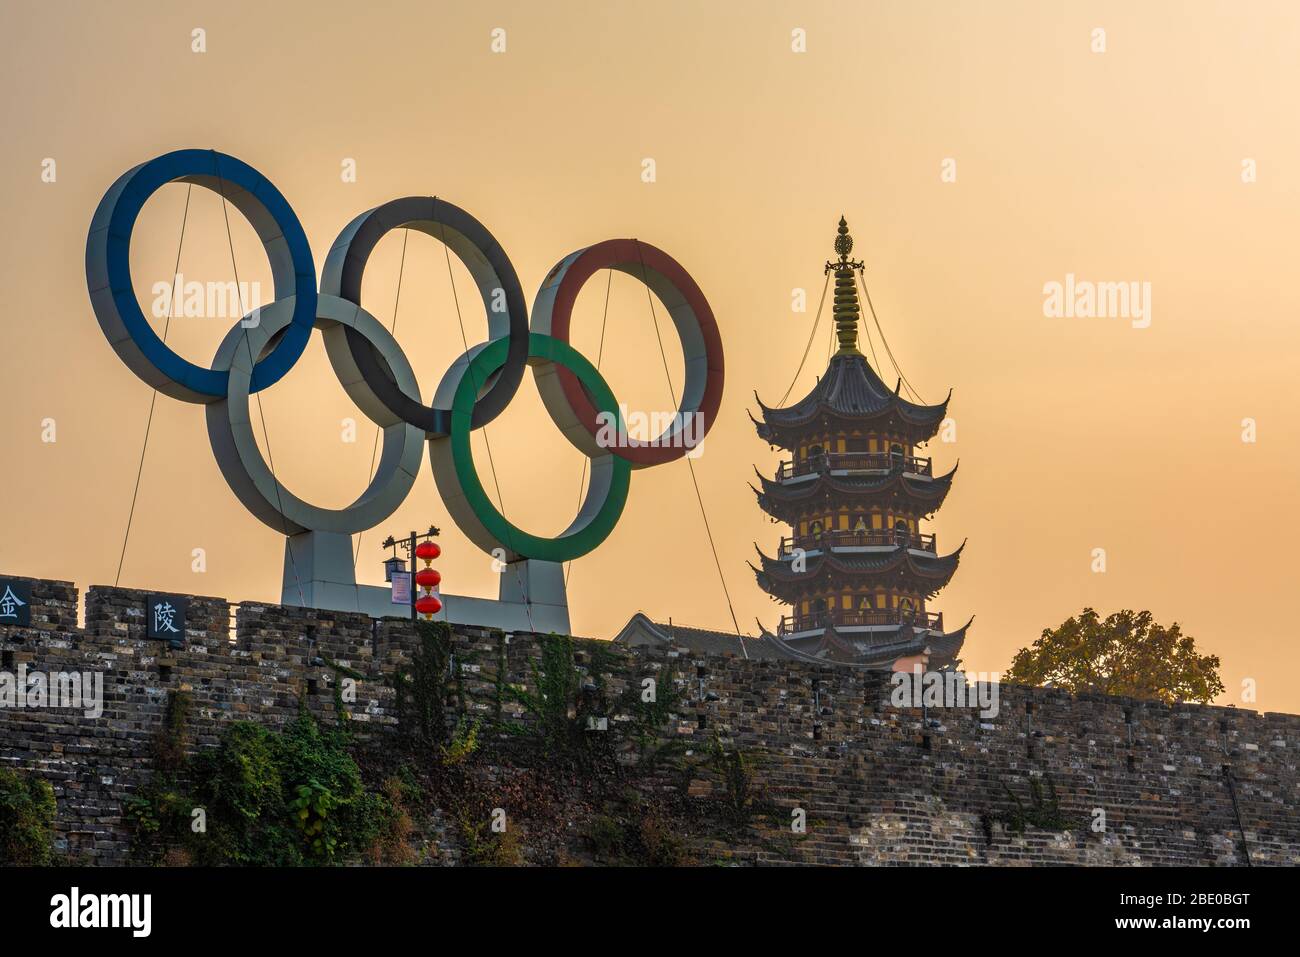 NANJING, CHINA - NOVEMBER 08: View of the Olympic sign on the Nanjing City Wall with Jiming Temple in the distance on November 08, 2019 in Nanjing Stock Photo